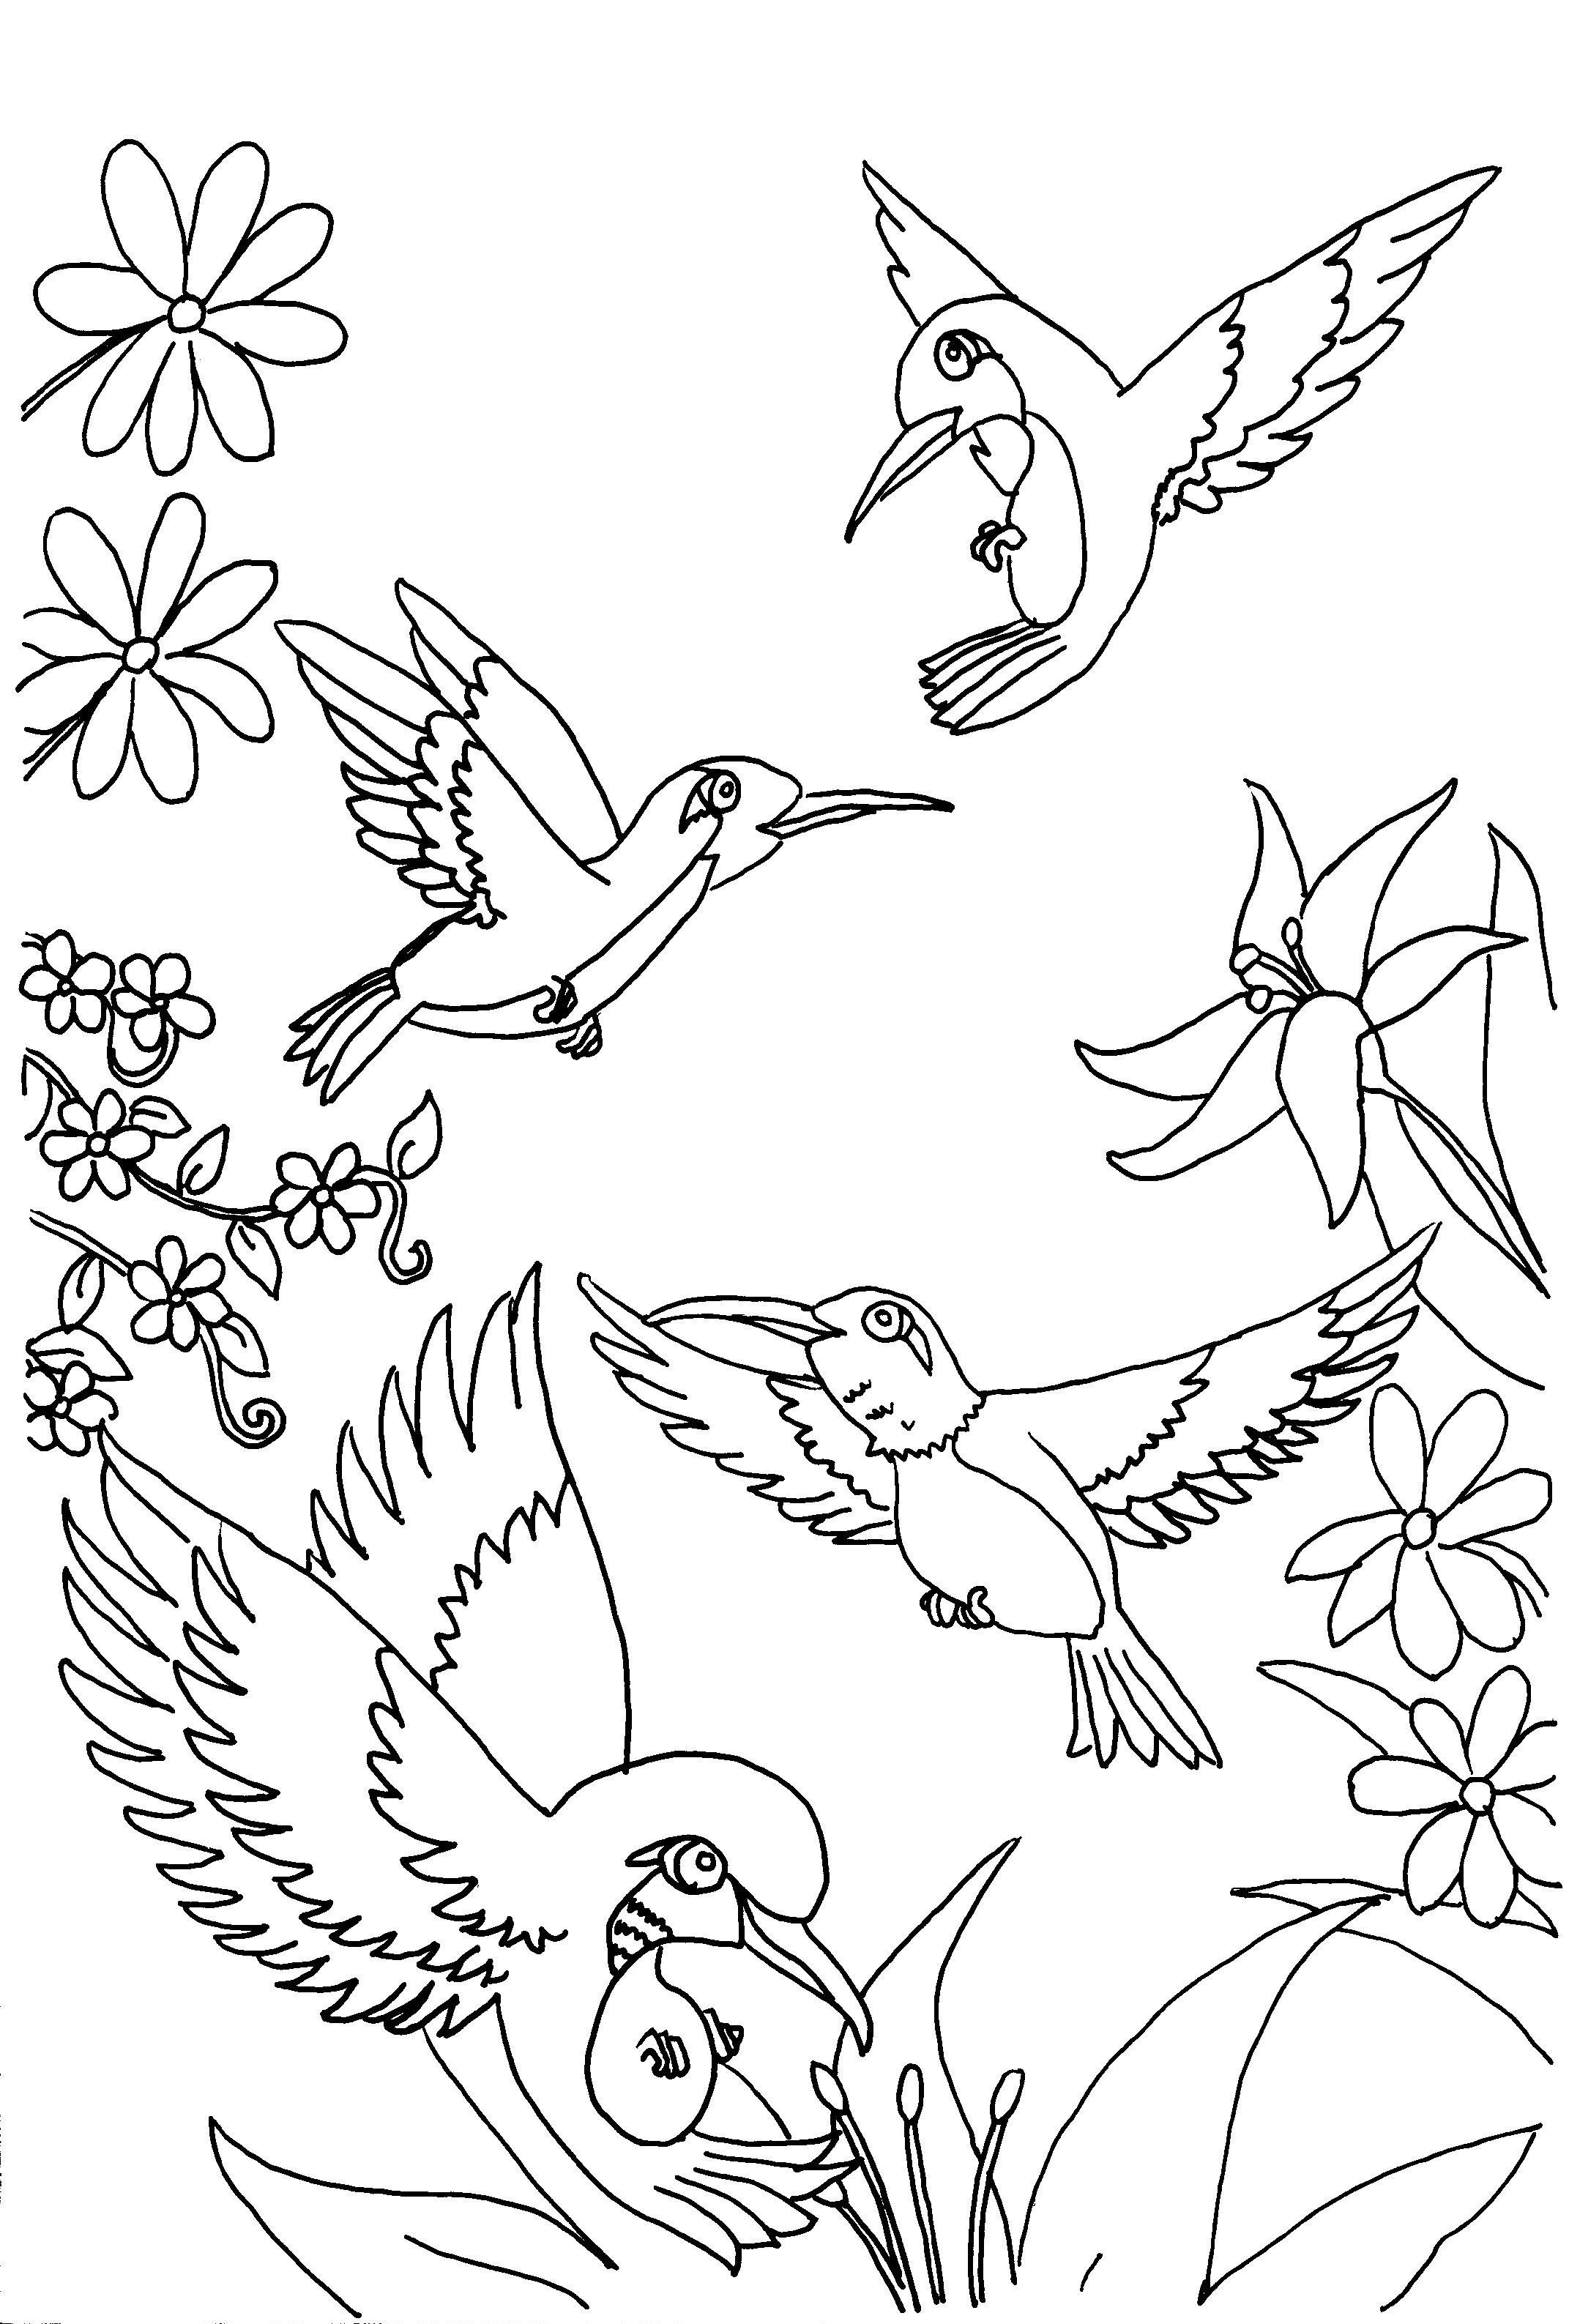 Free Downloadable Coloring Pages For Toddlers
 Free Printable Hummingbird Coloring Pages For Kids